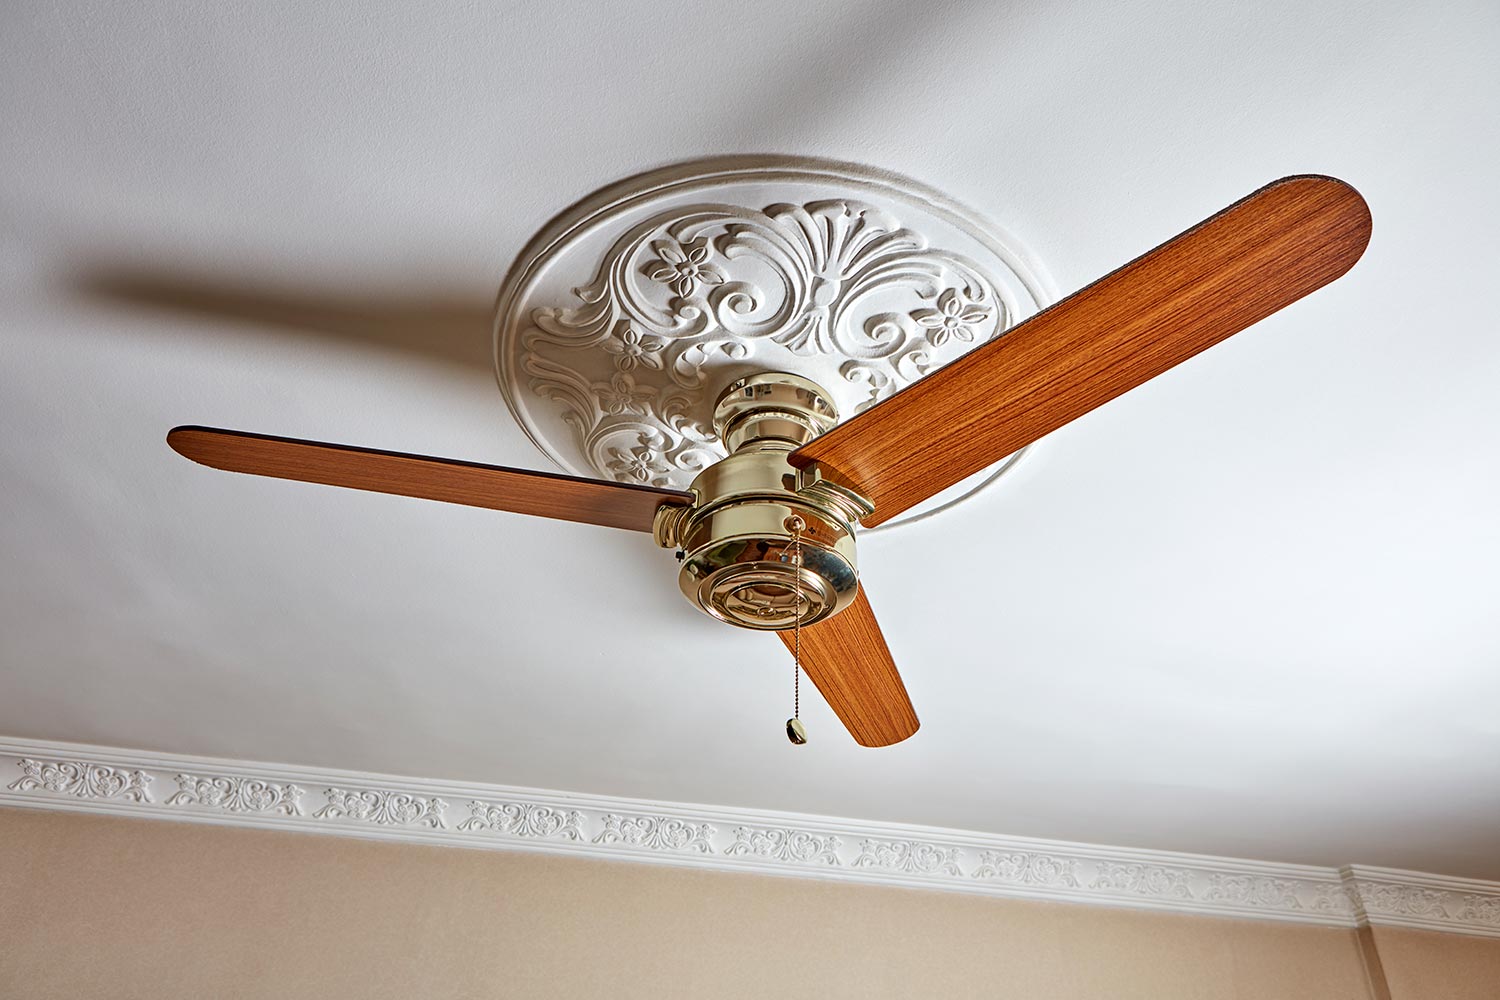 Ceiling fan with wooden blade